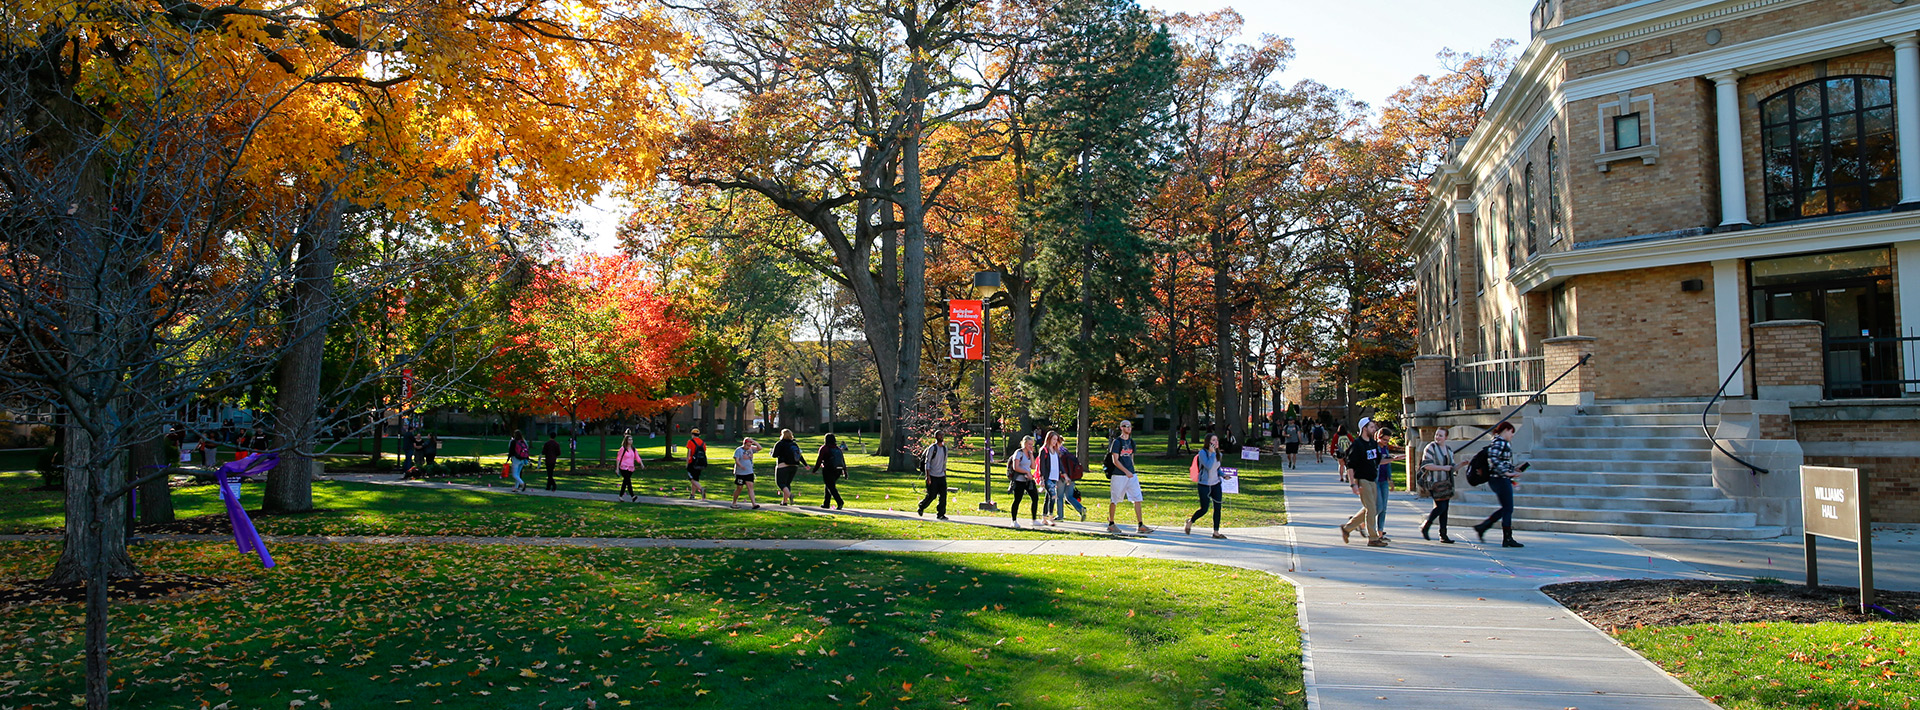 students in union oval